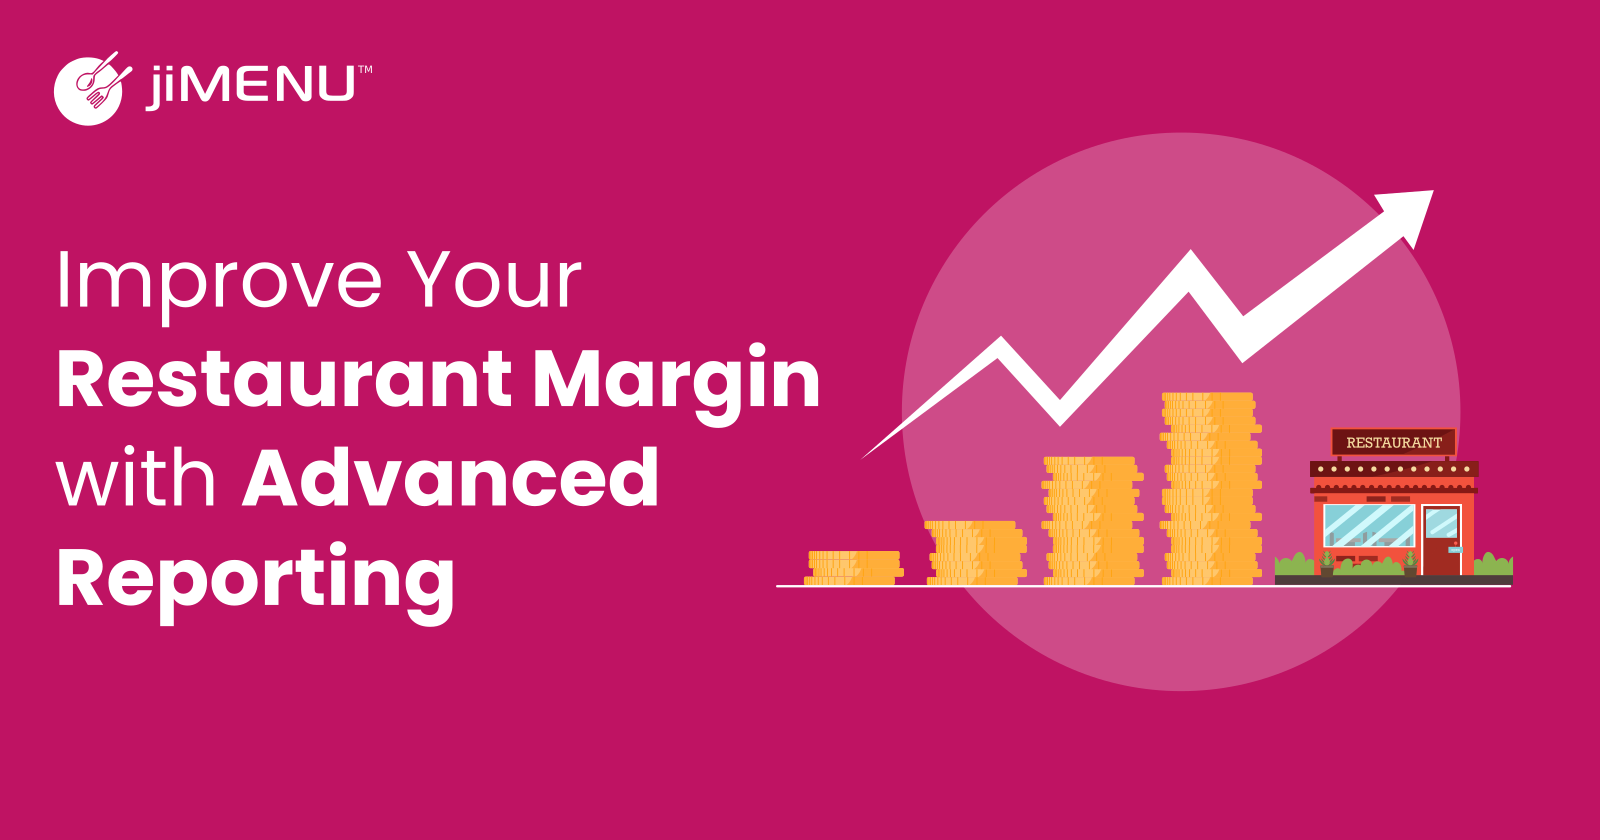 Improve Your Restaurant Margin With Advanced Reporting